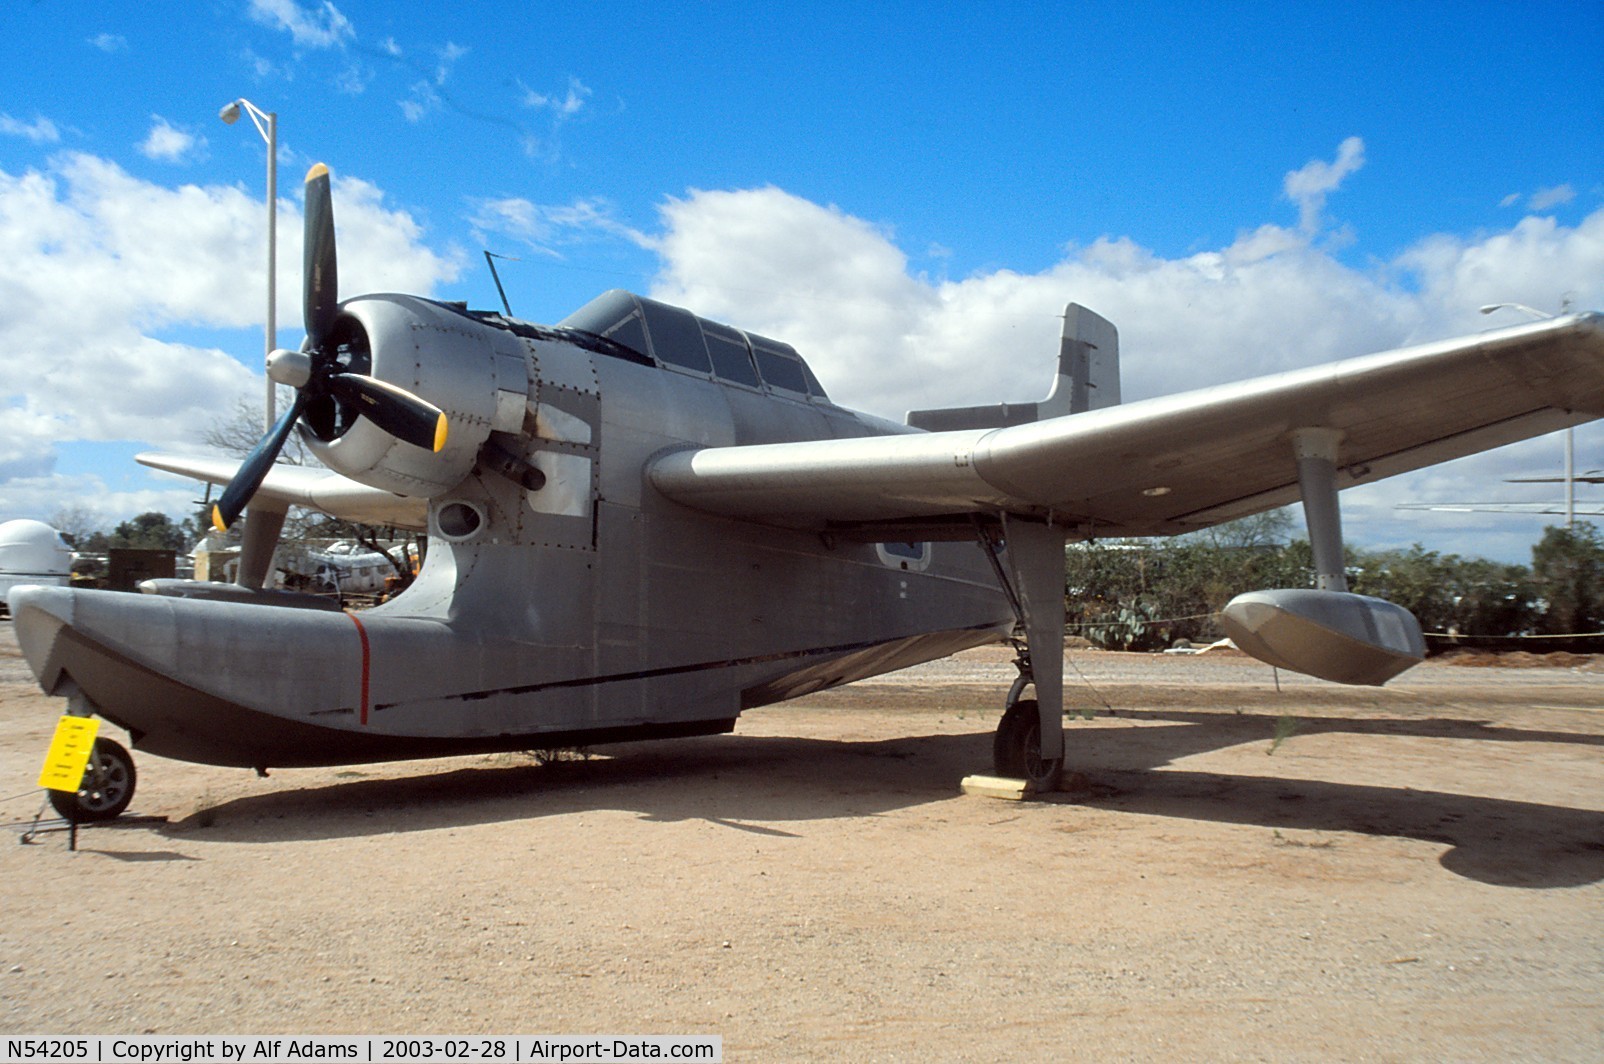 N54205, 1949 Columbia Aircraft XJL-1 C/N 31400, Displayed outside at Pima Air & Space Museum, Tucson, Arizona in 2003.